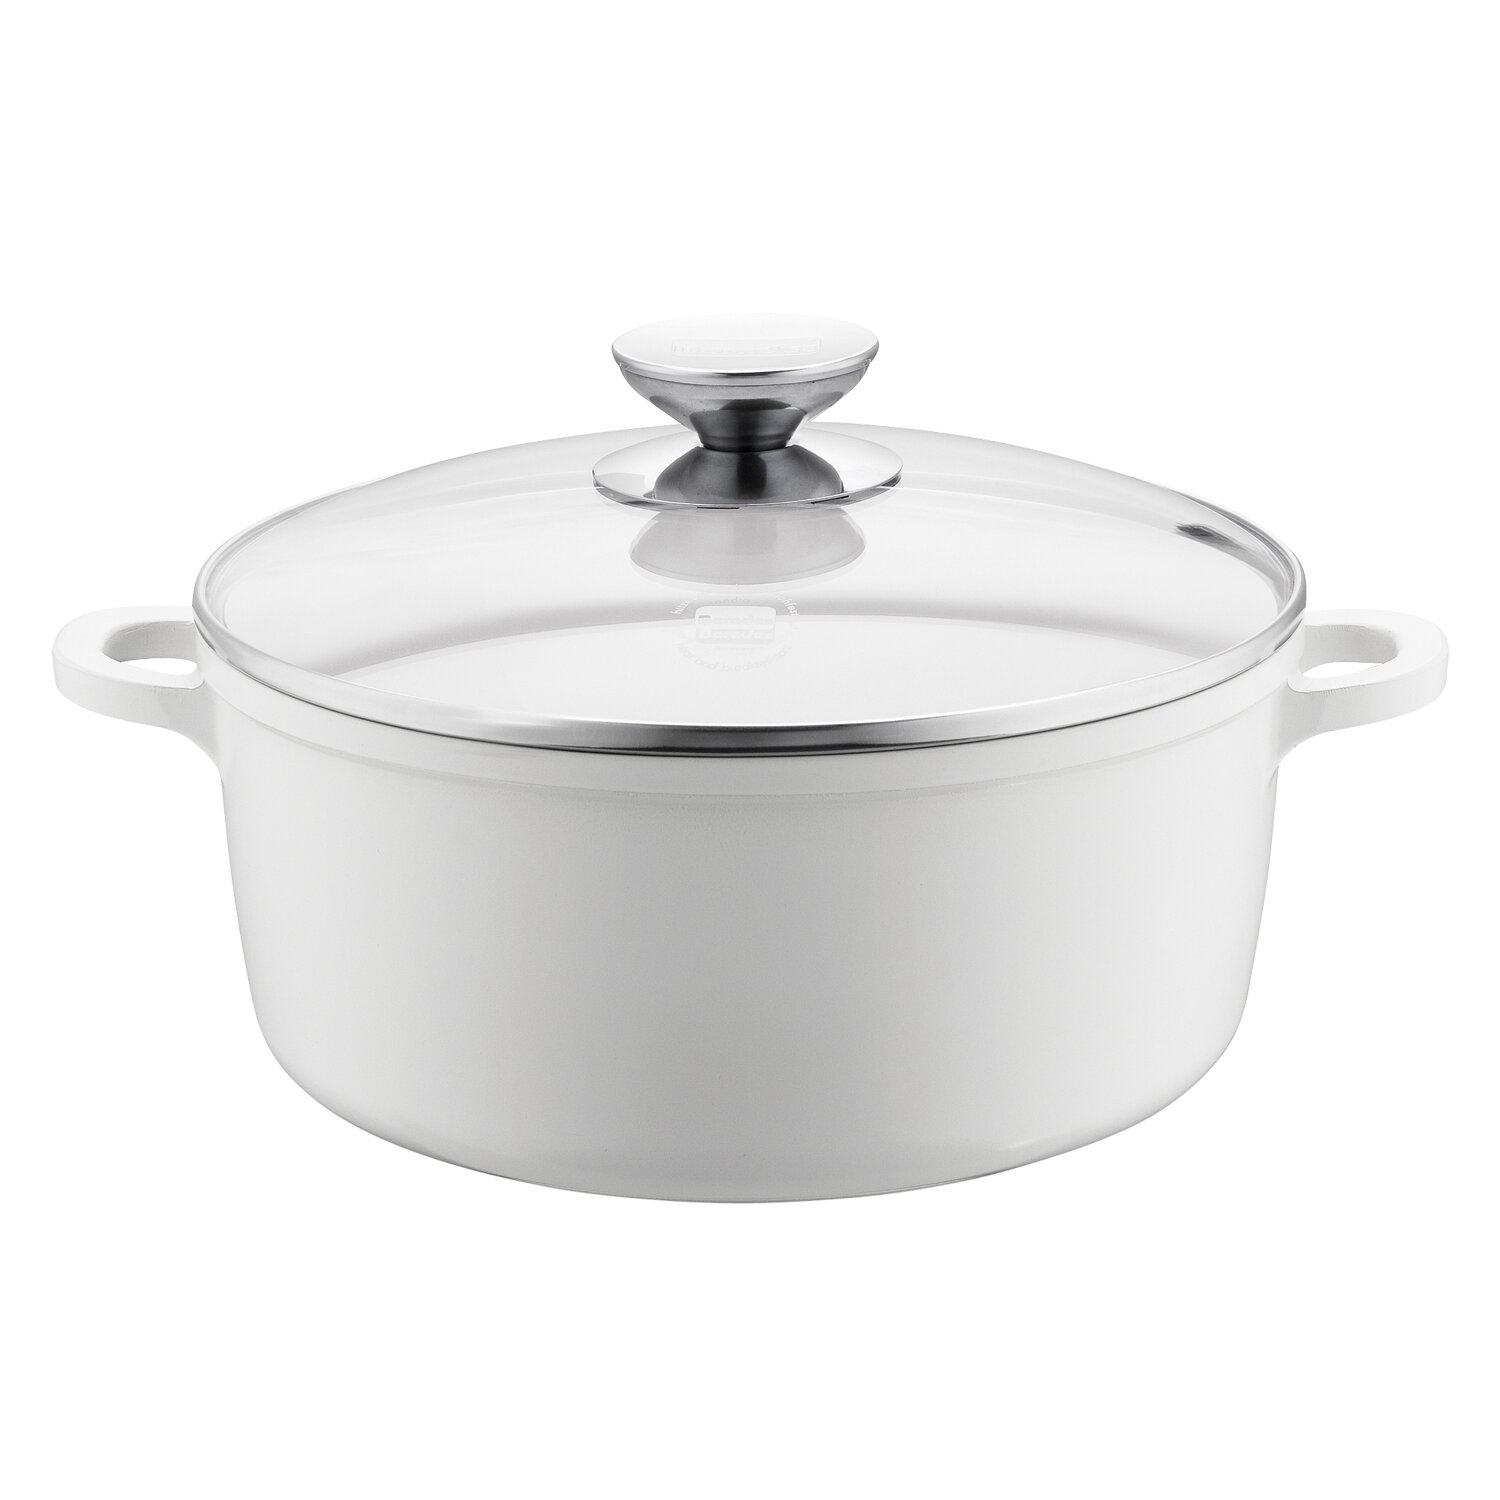 Berndes Tradition 11 Inch Sauteuse Pan with Glass Lid by Berndes - 3